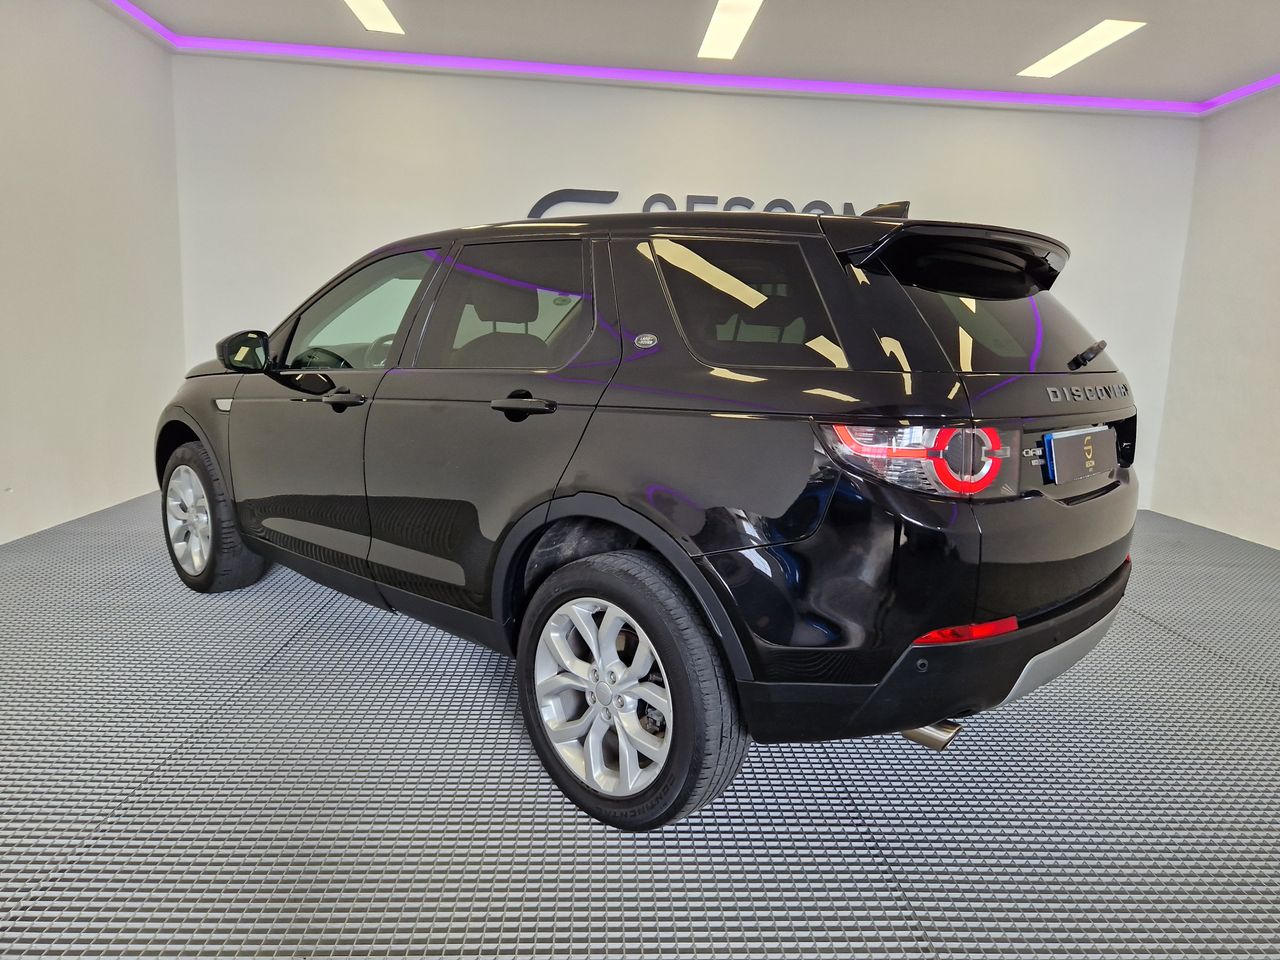 Foto Land-Rover Discovery Sport 15